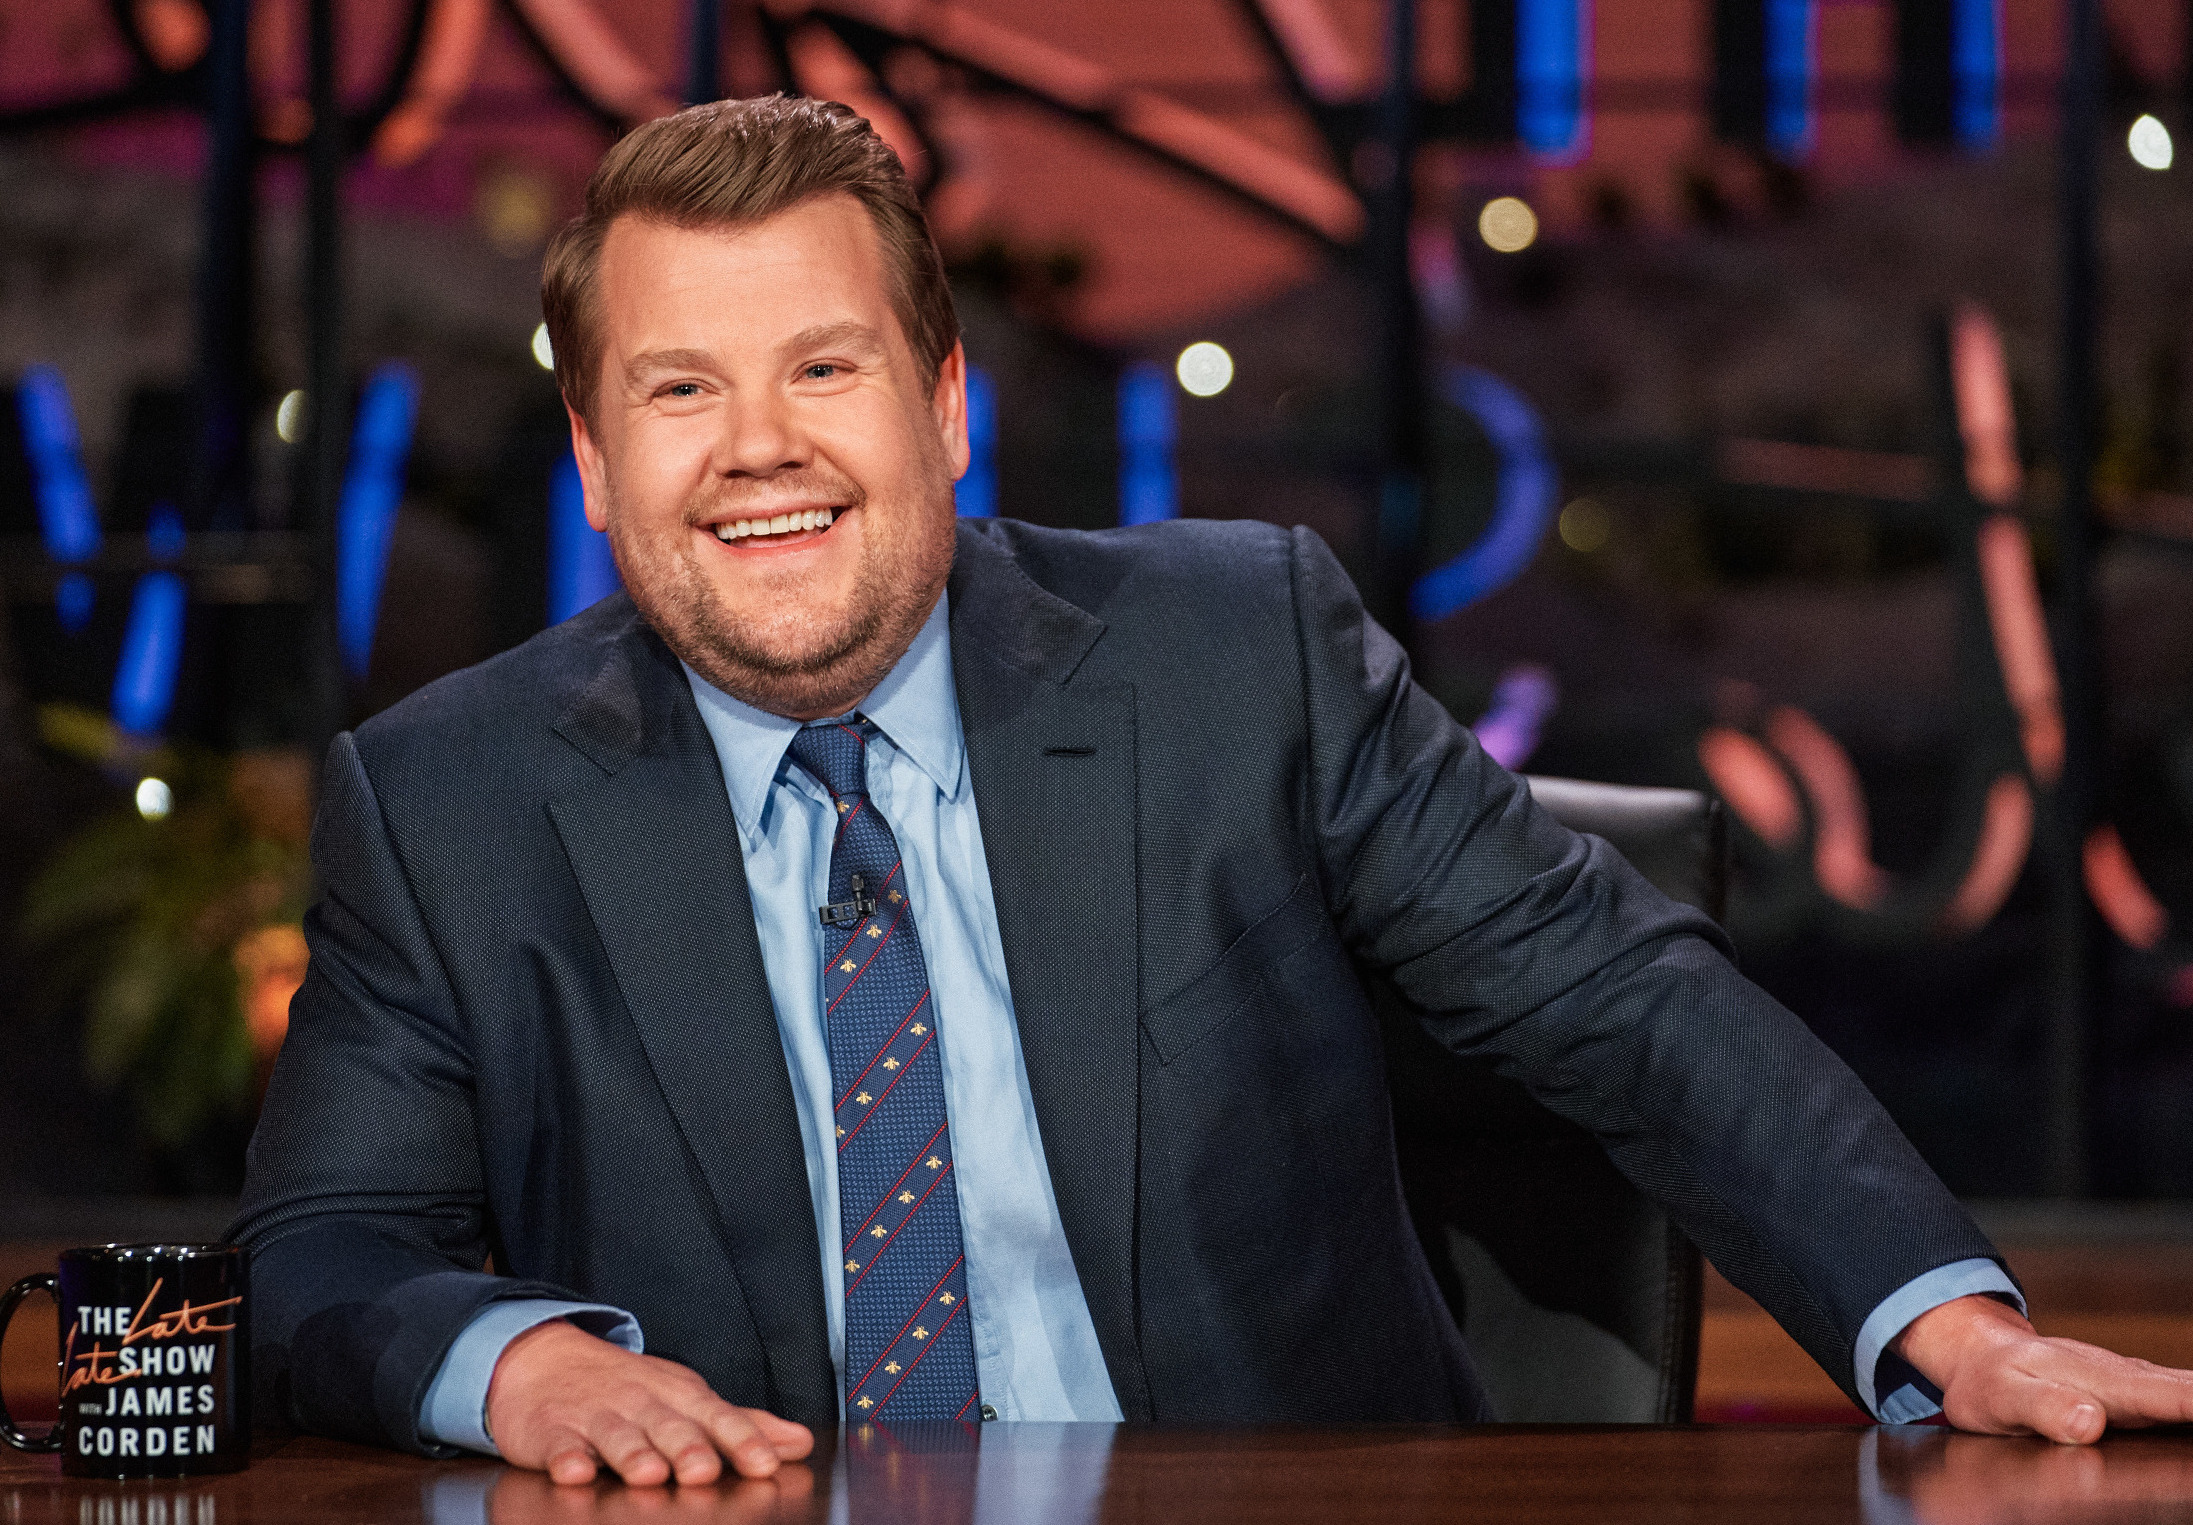 Report: CBS lost M on canceled ‘Late Late Show’ with James Corden.